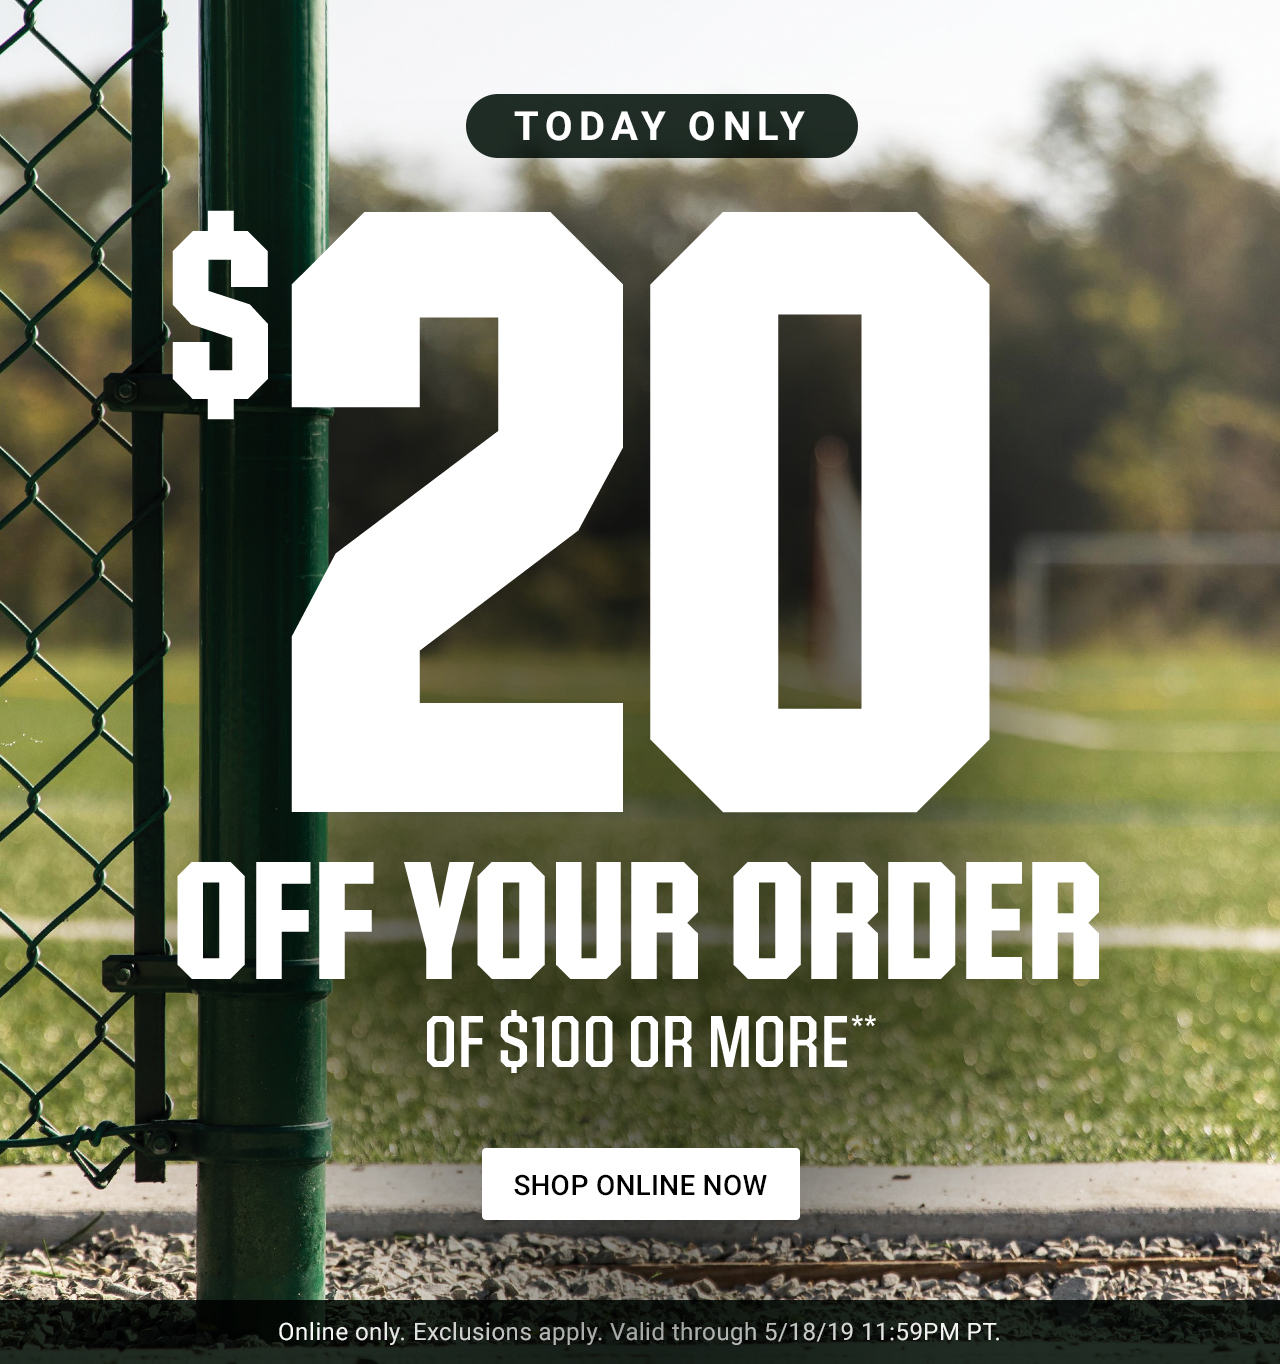 Ends tonight. | Take $20 off your order of $100 or more.** | Shop Online Now > | Online only. Exclusions apply. Valid through 5/18/19 11:59PM PT. | Missed the offer? You can still shop this week's deals.